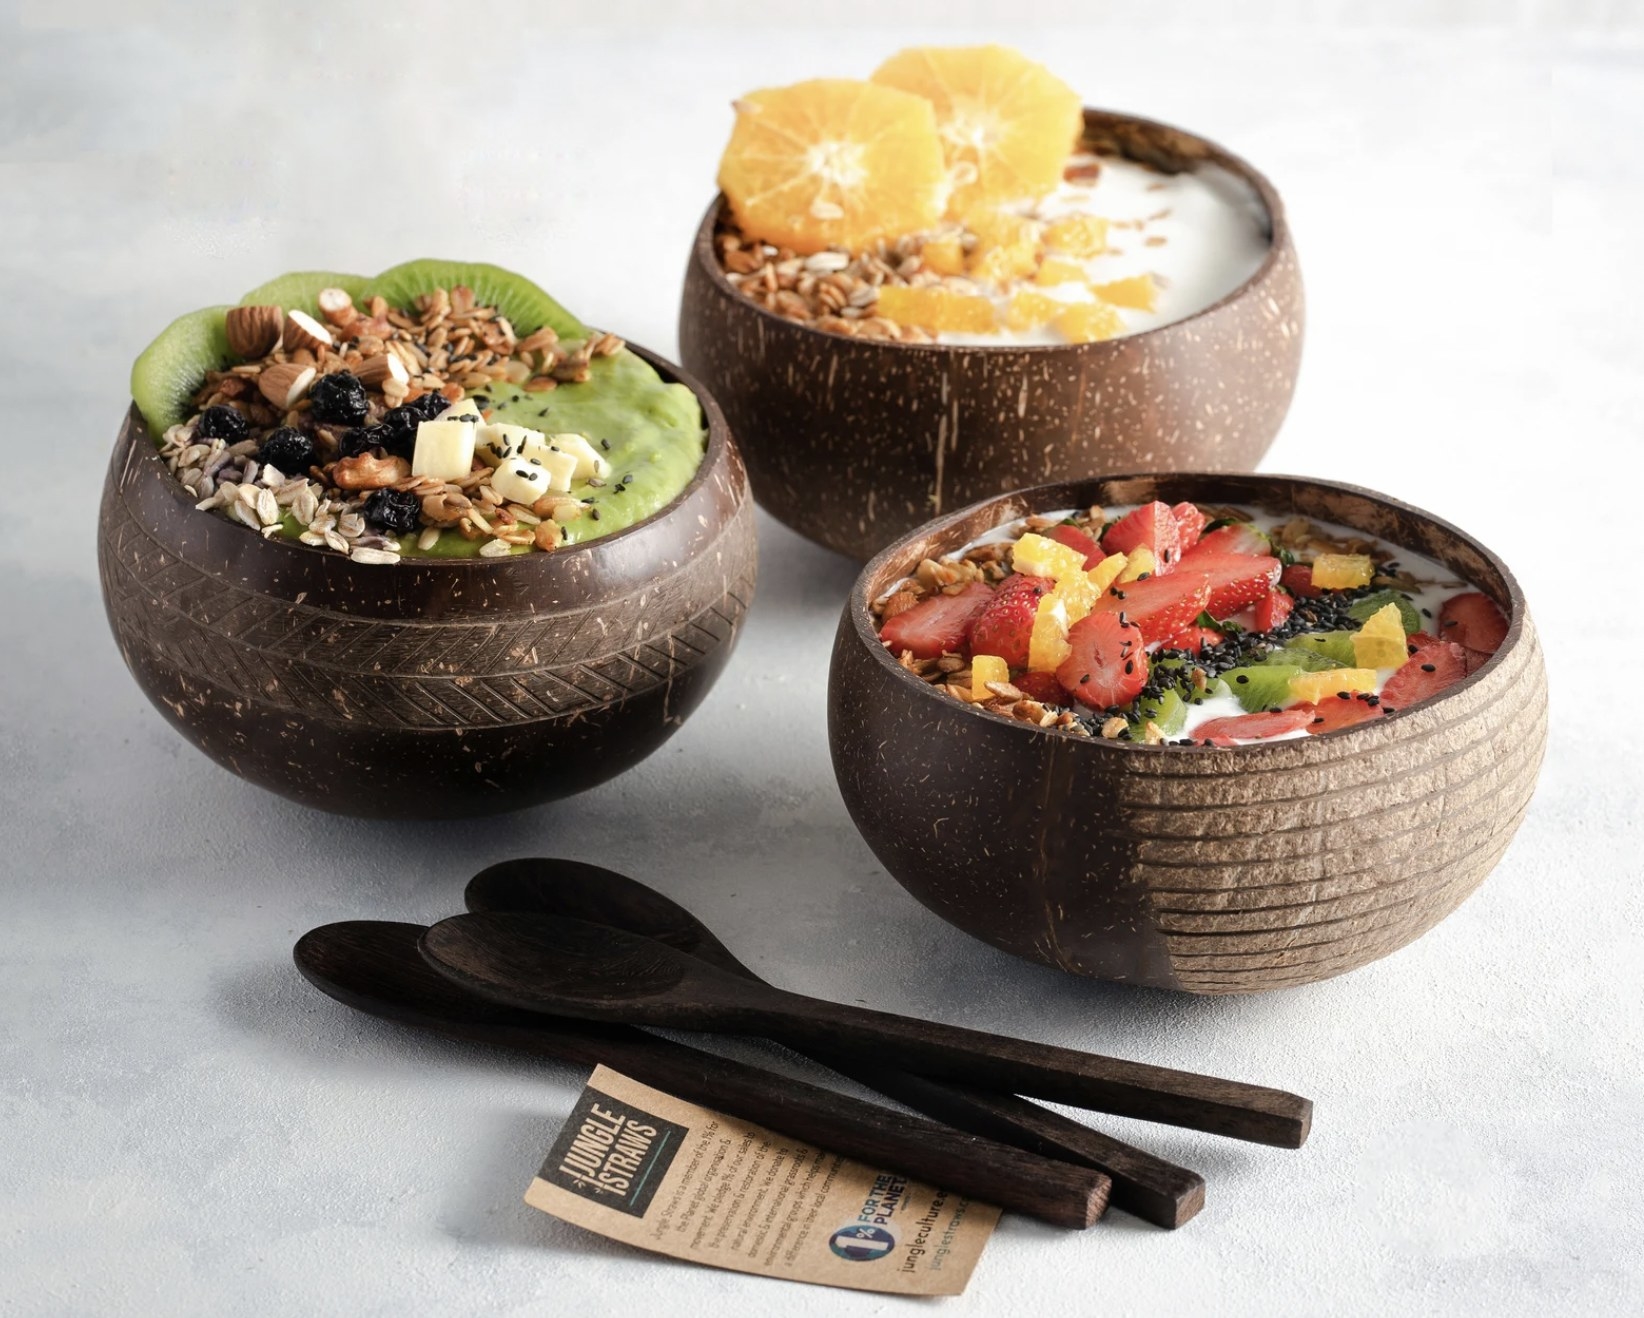 Three of the coconut bowls each filled with a smoothie bowl with spoons resting on table